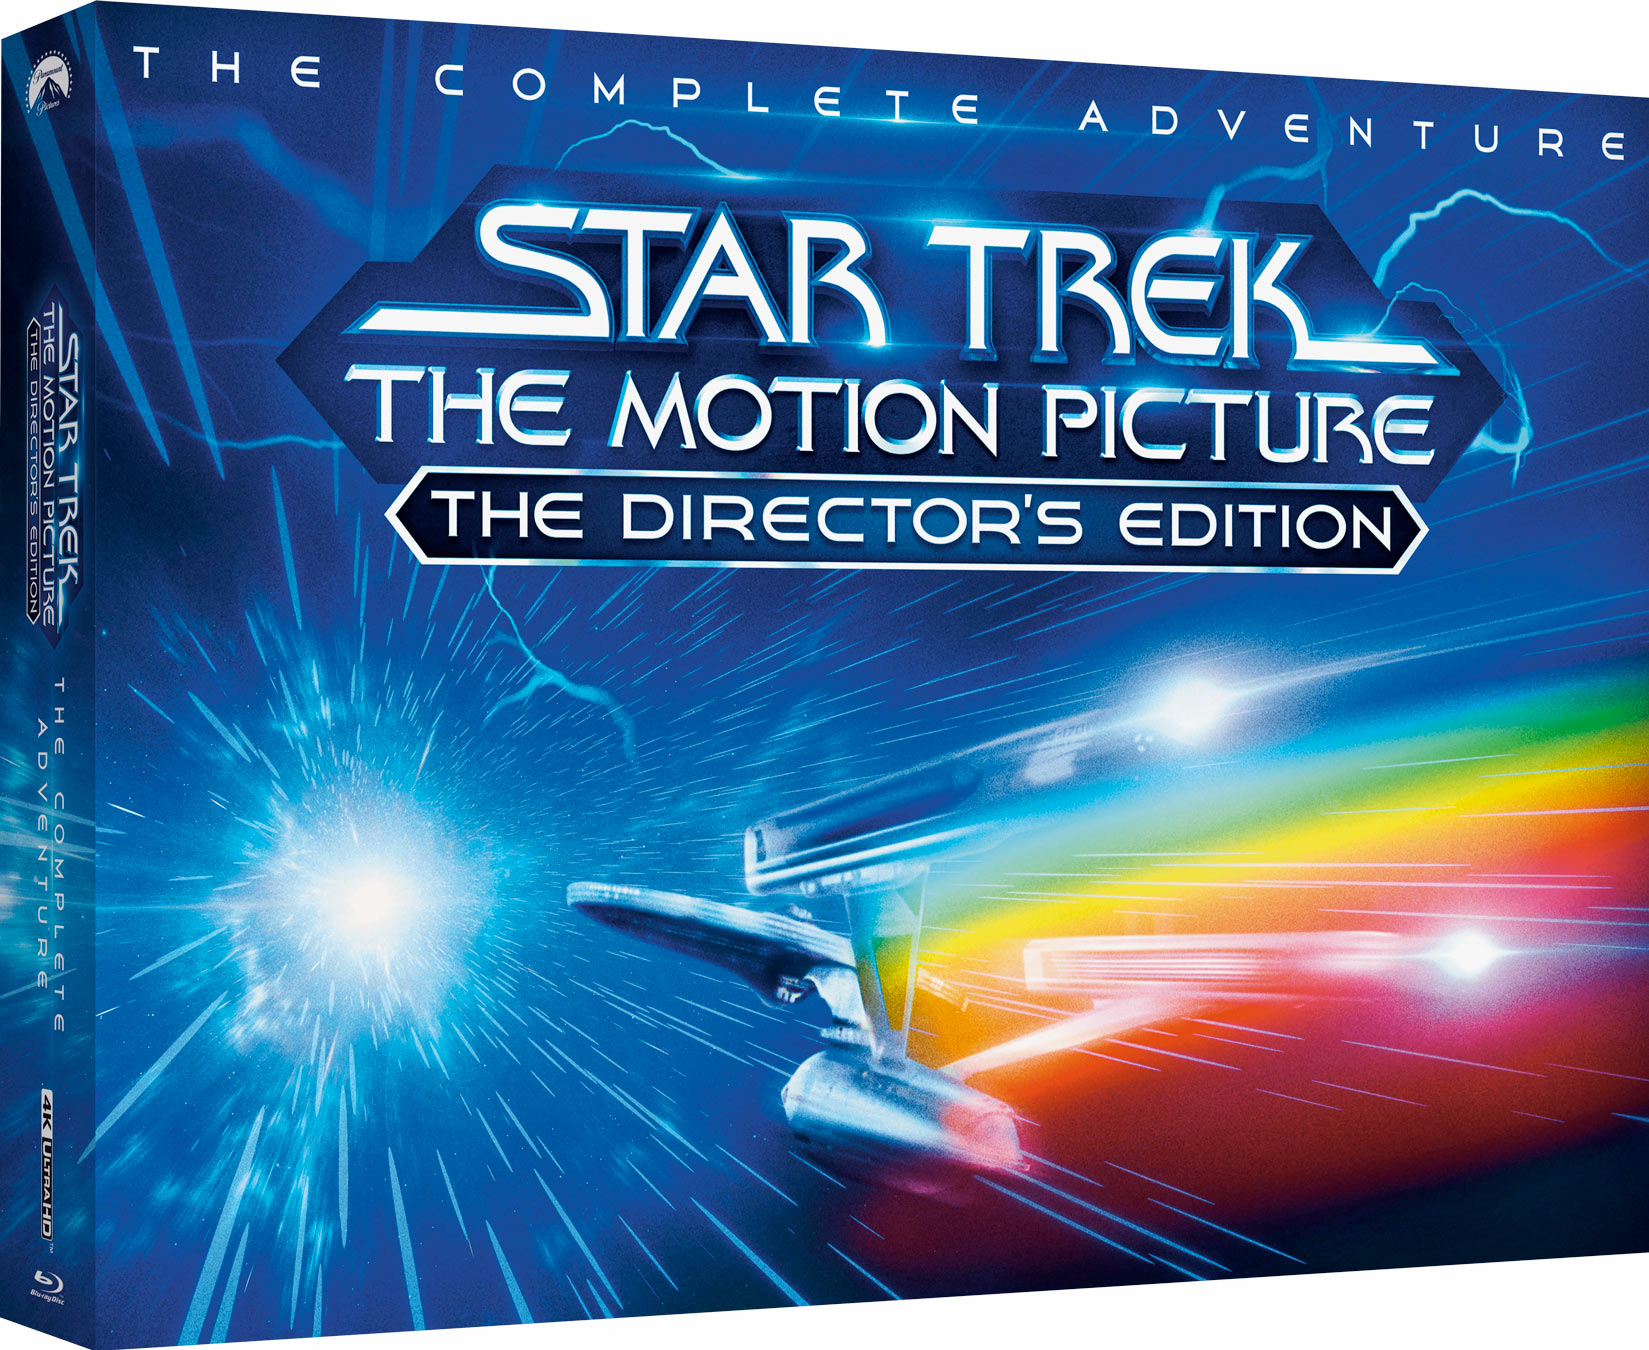 Star Trek The Motion Picture - The Director's Edition - Coffret collector 4K Ultra HD + Blu-ray + Goodies